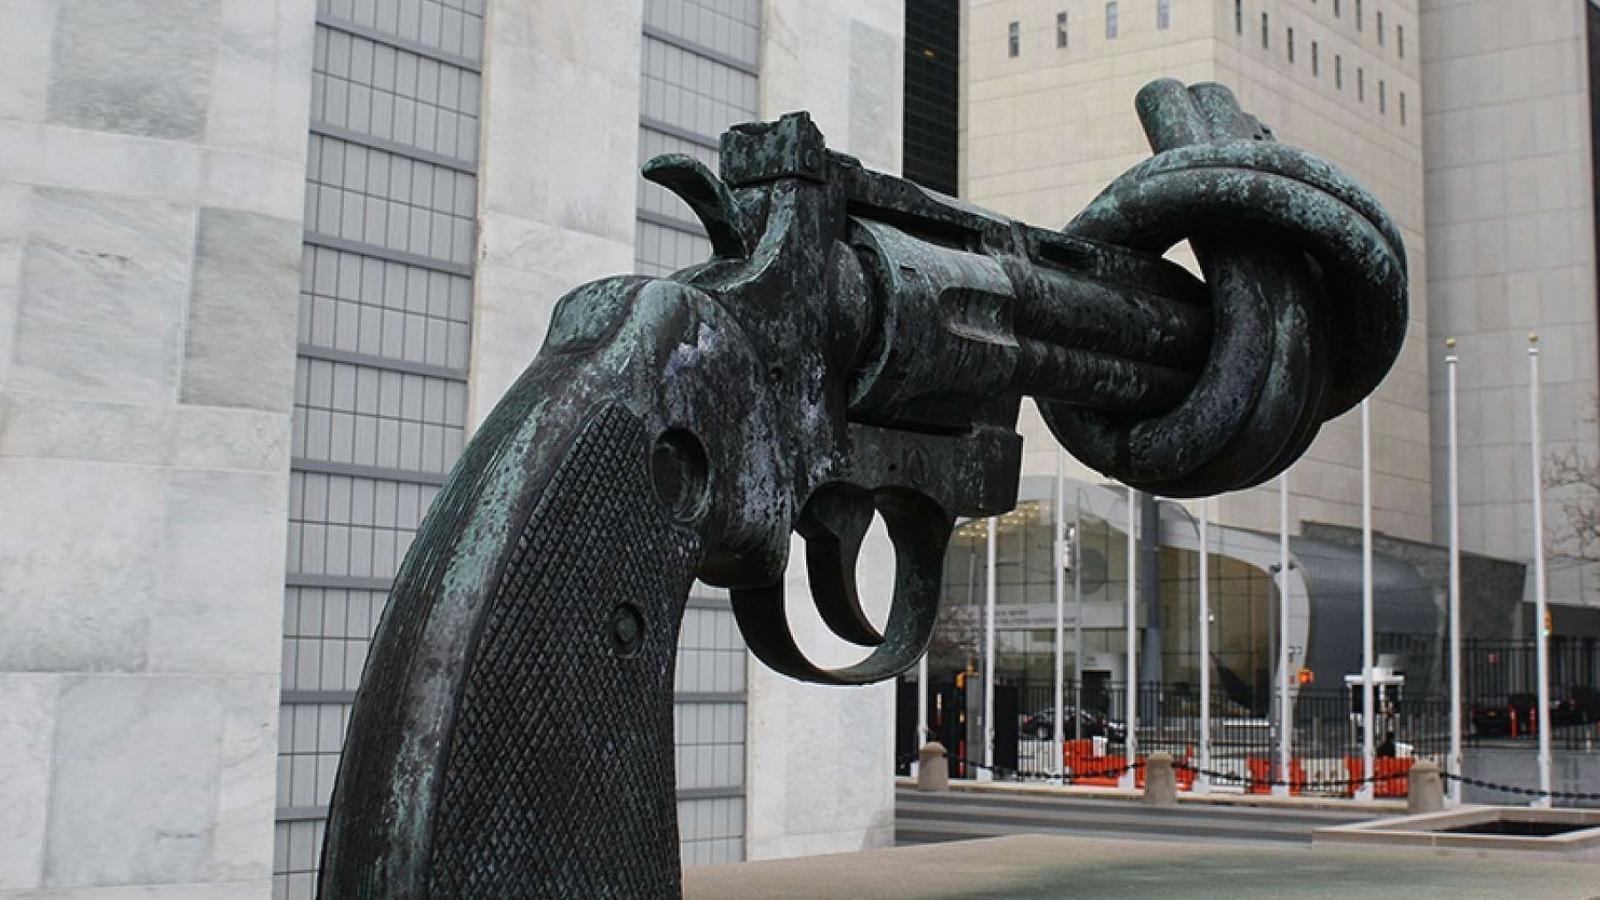 Sculpture of a gun with barrel twisted in a knot